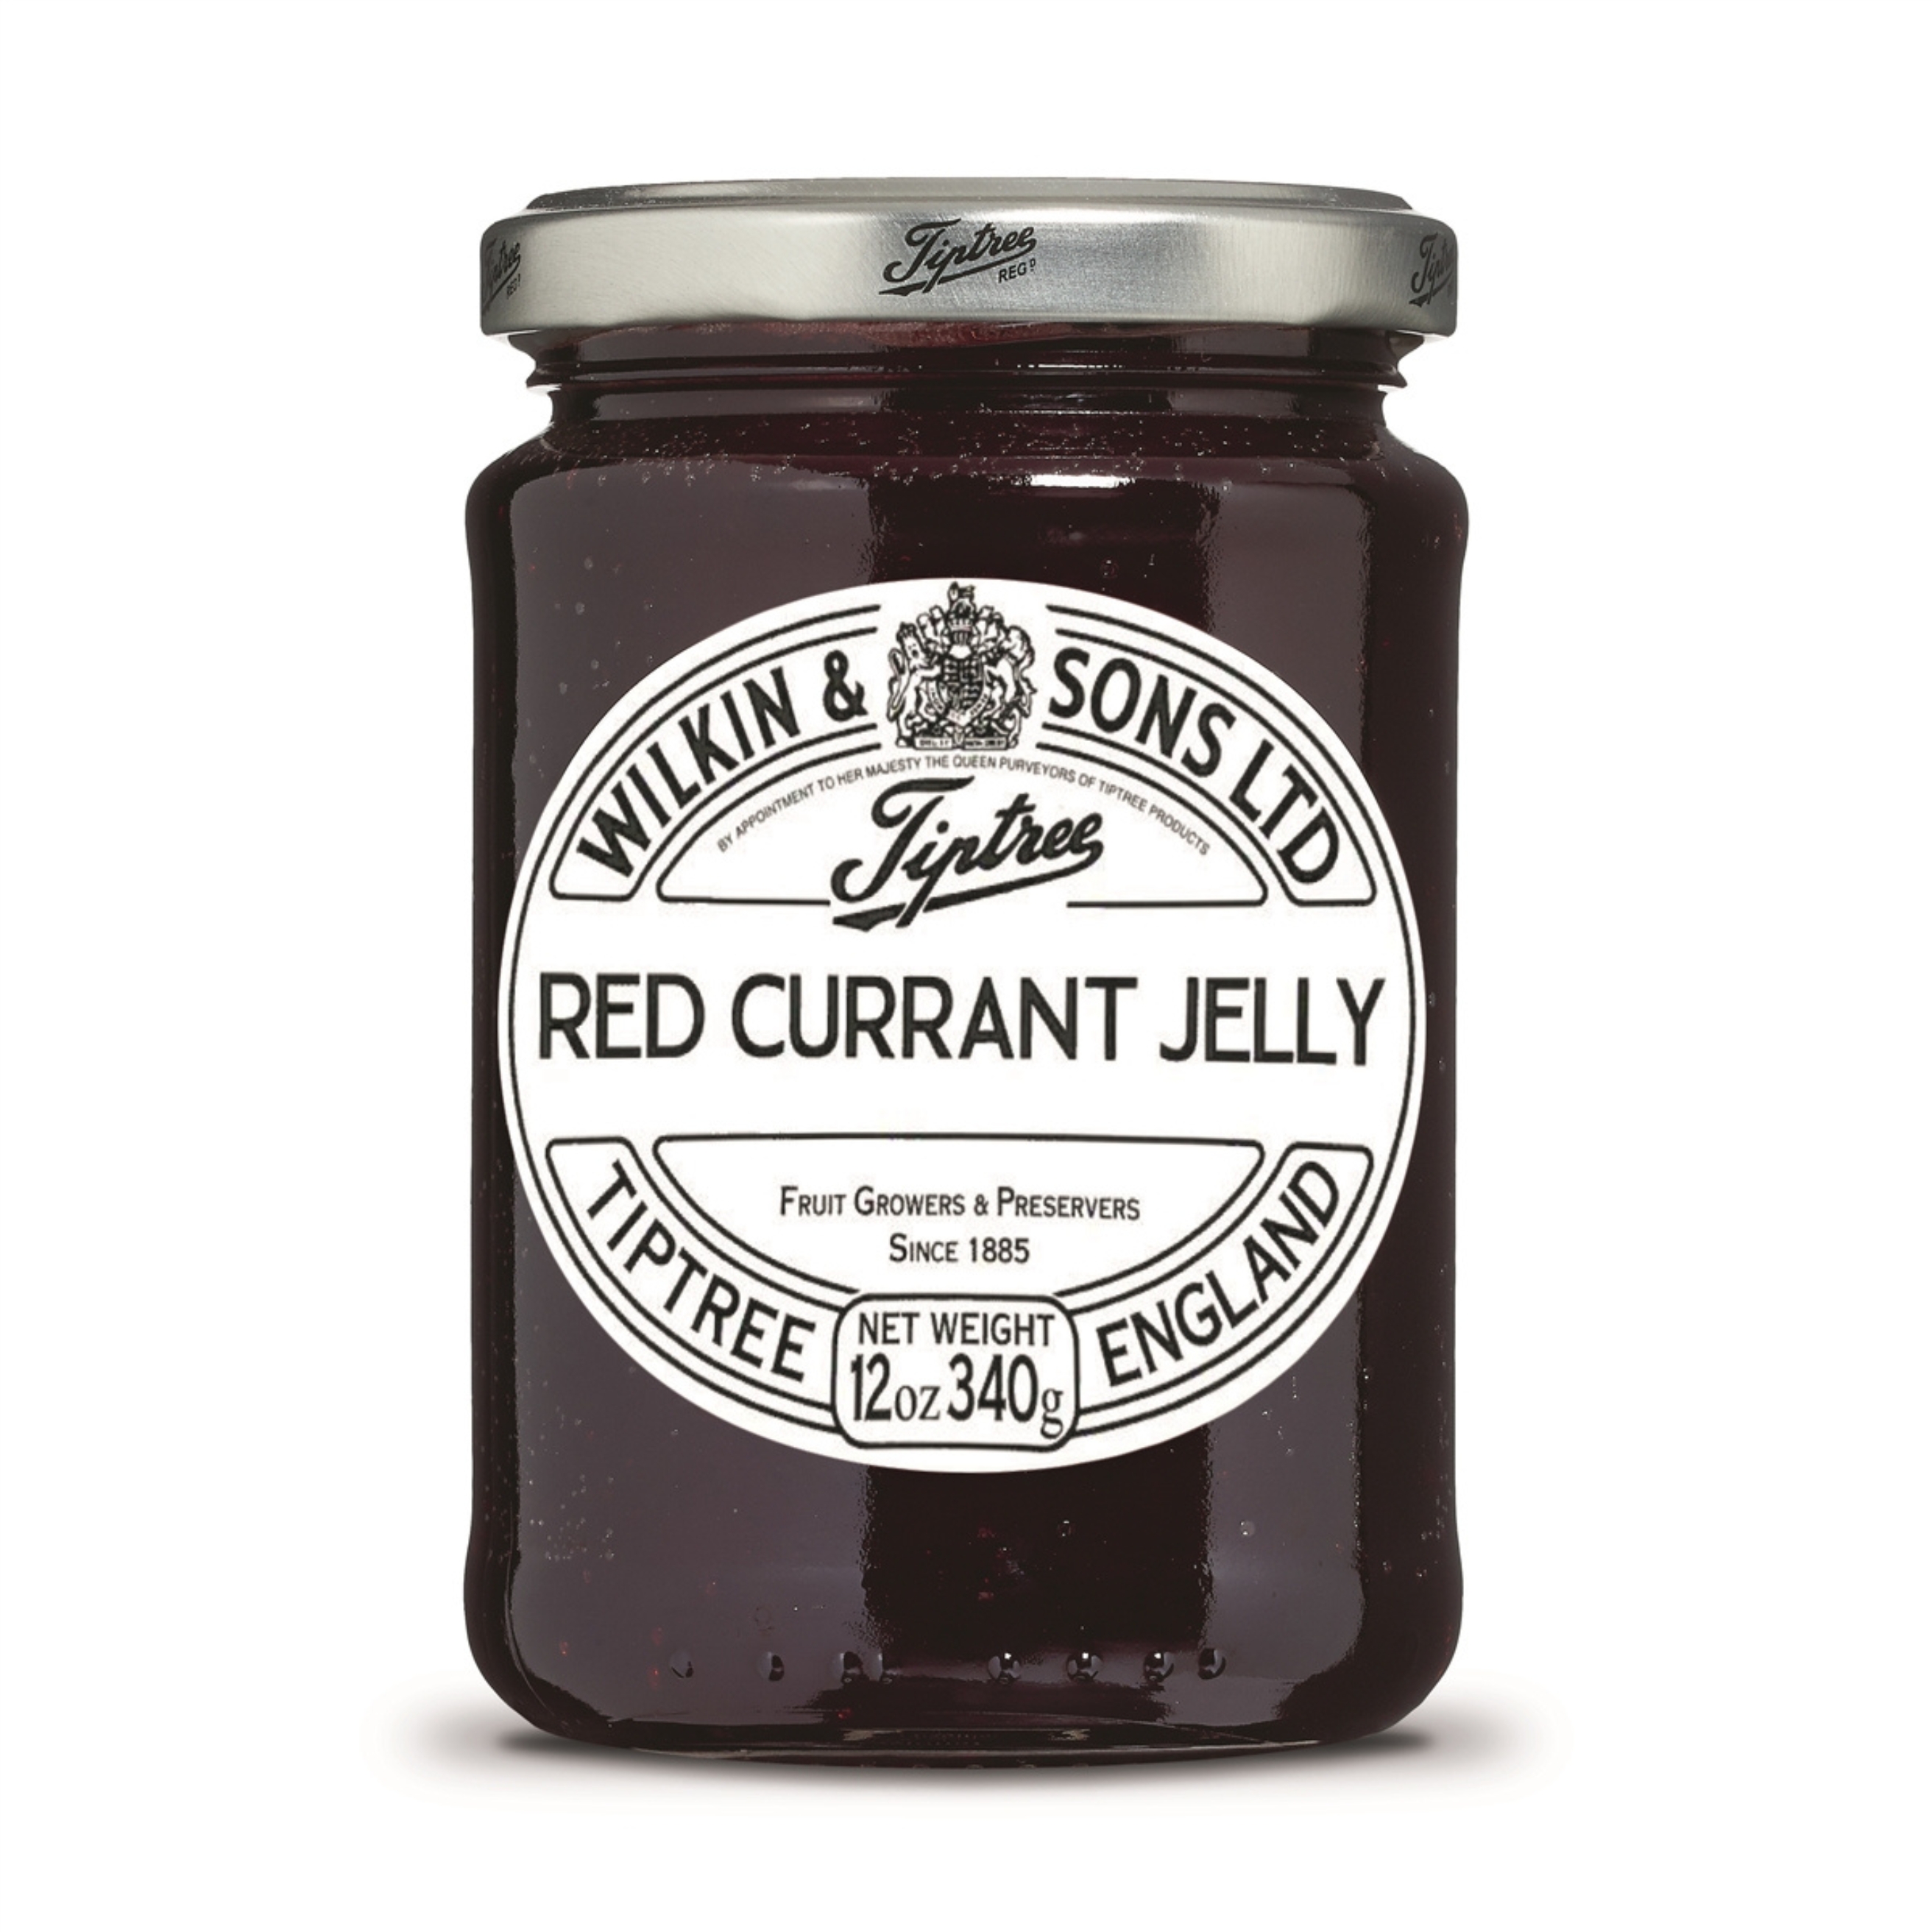 Tiptree Red Currant Jelly, 12 Ounce Jar - image 1 of 8